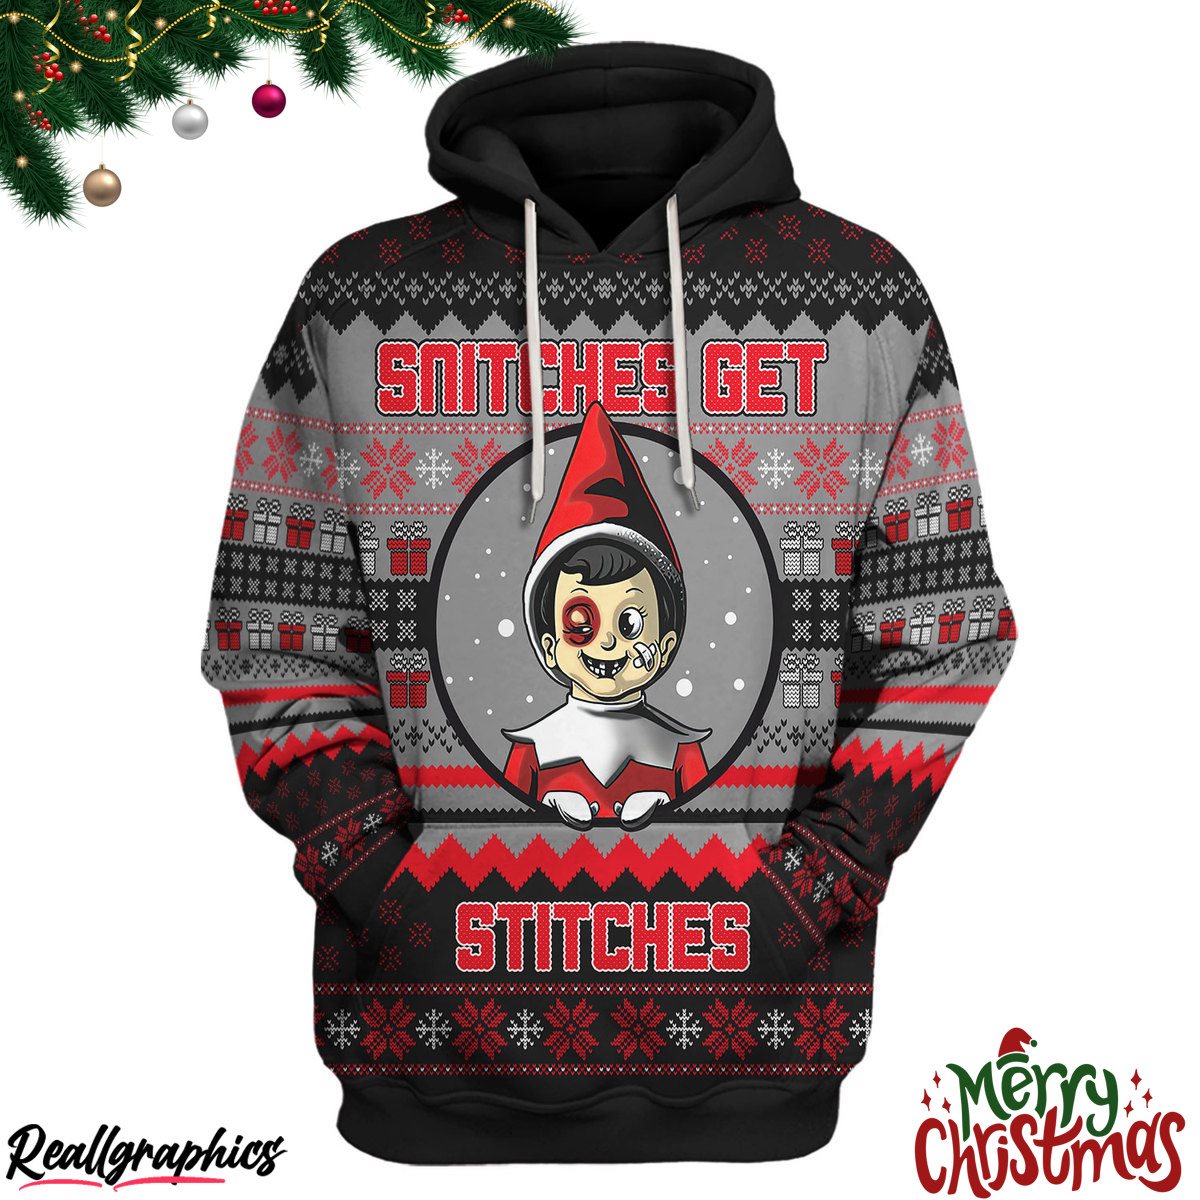 merry christmas snitches get stiches christmas ugly sweatshirt - sweater